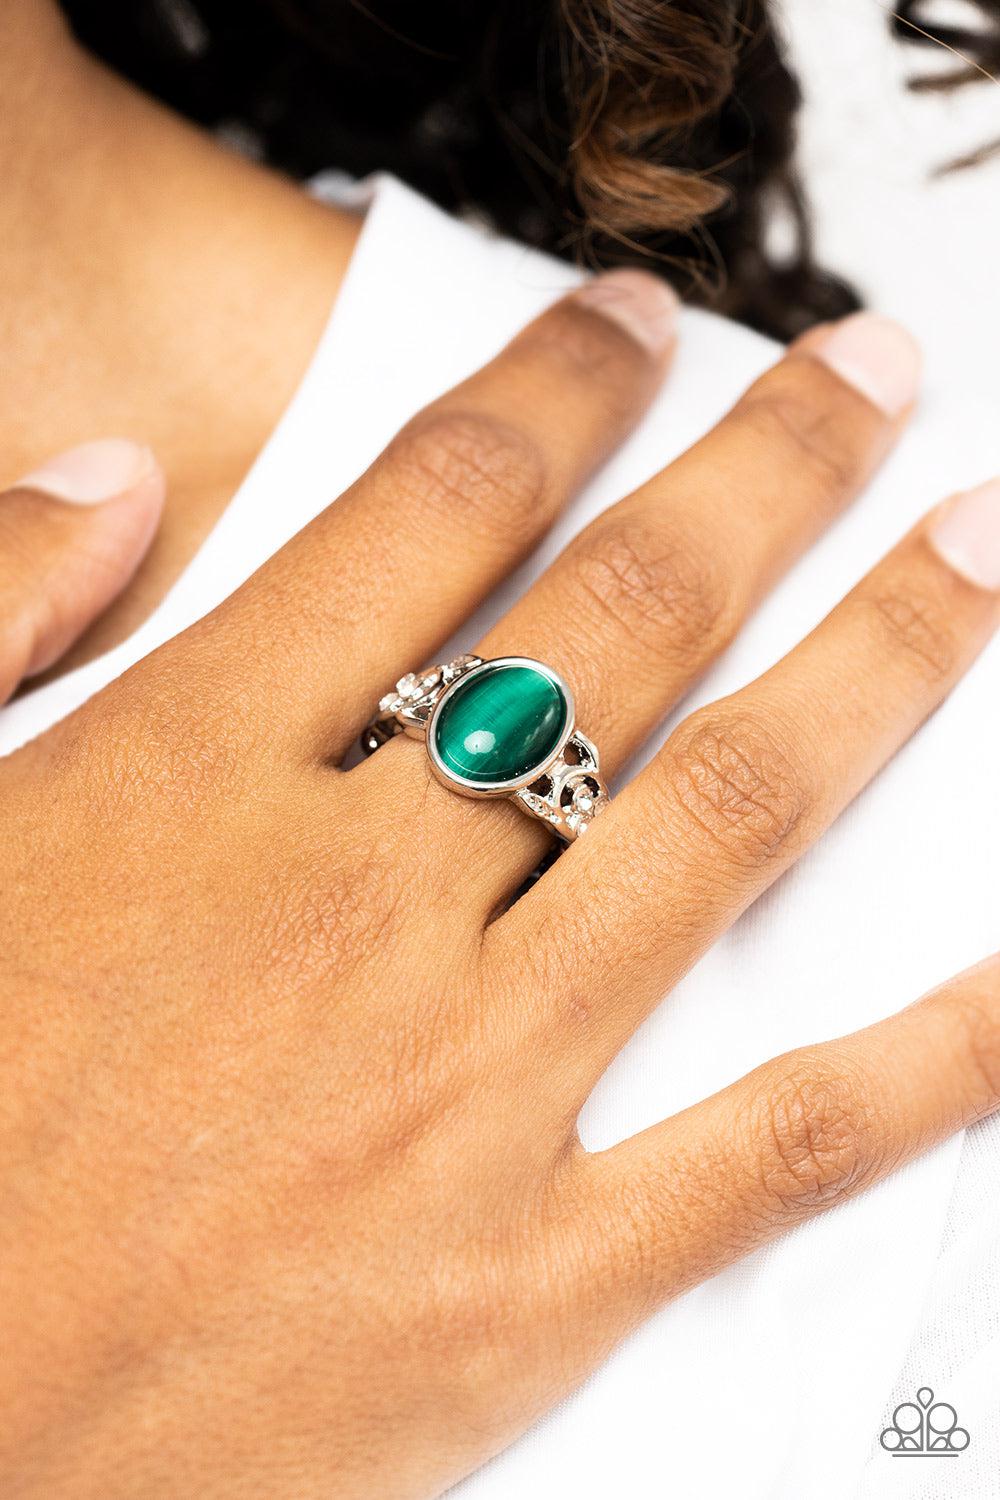 Crystals and Cats Eye Green Stone Ring - Paparazzi Accessories-on model - CarasShop.com - $5 Jewelry by Cara Jewels